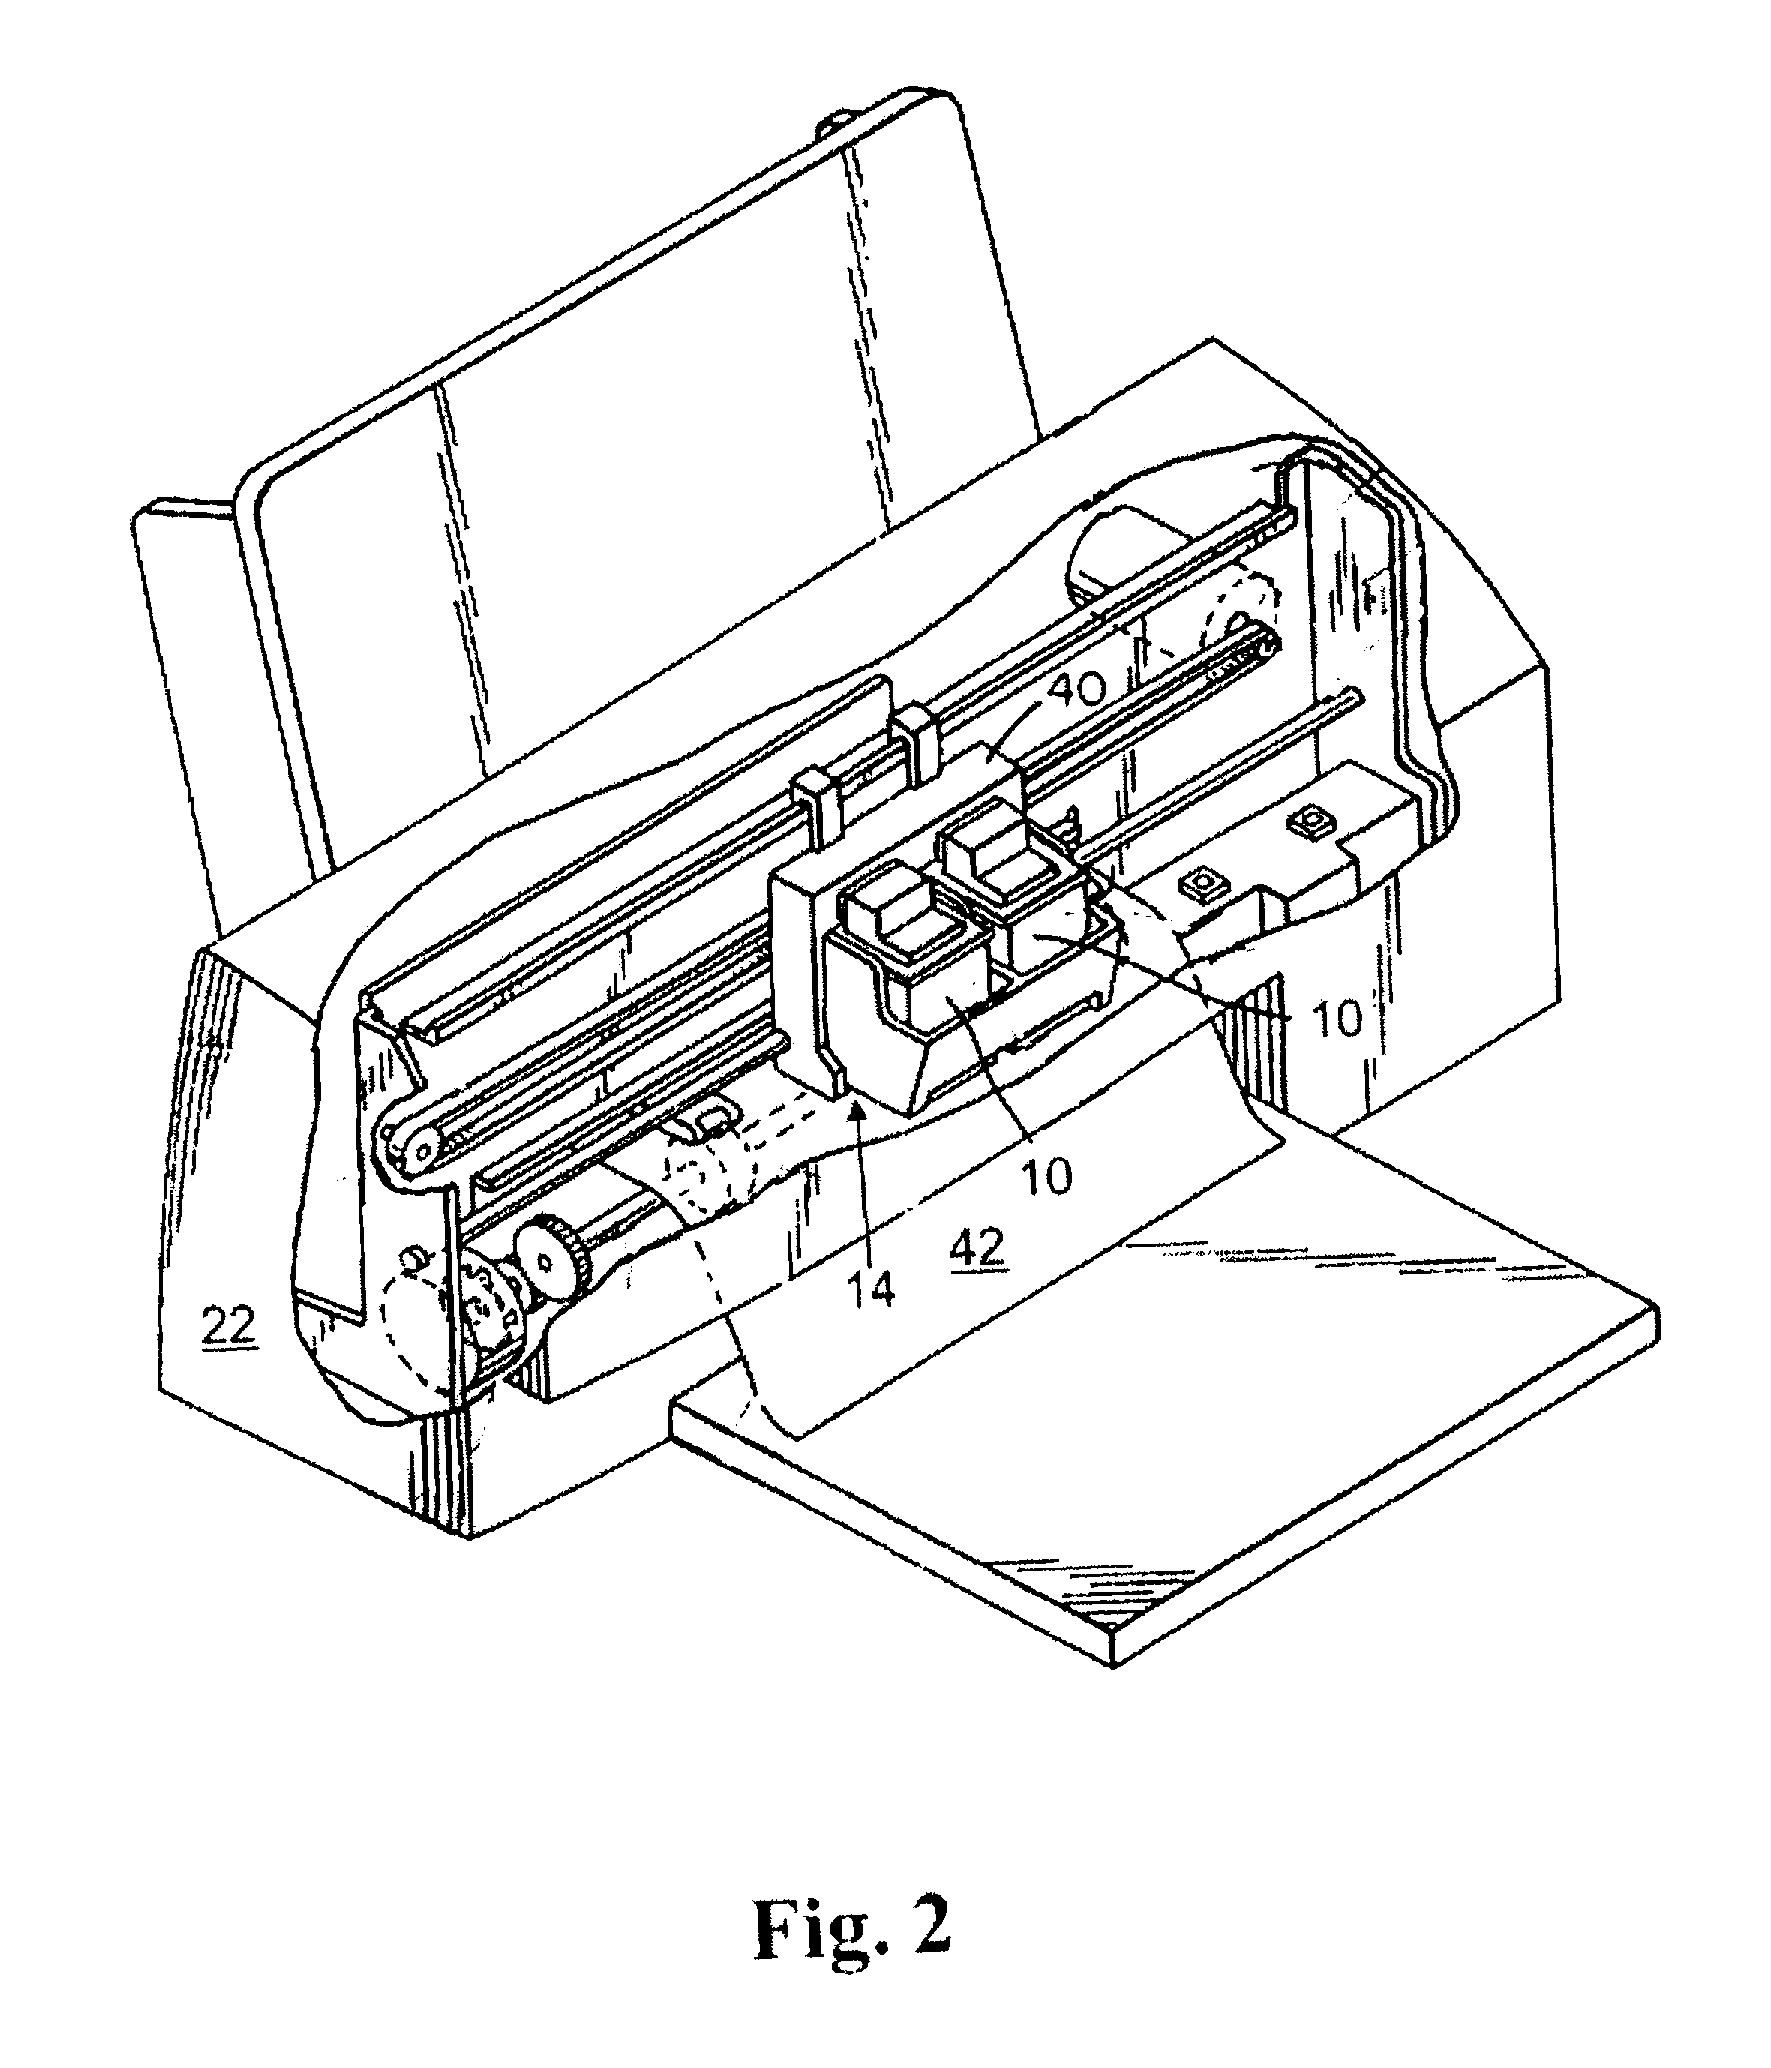 Micro-Fluid Ejection Devices, Methods For Making Micro-Fluid Ejection Heads, and Micro-Fluid Ejection Head Having High Resistance Thin Film Heaters